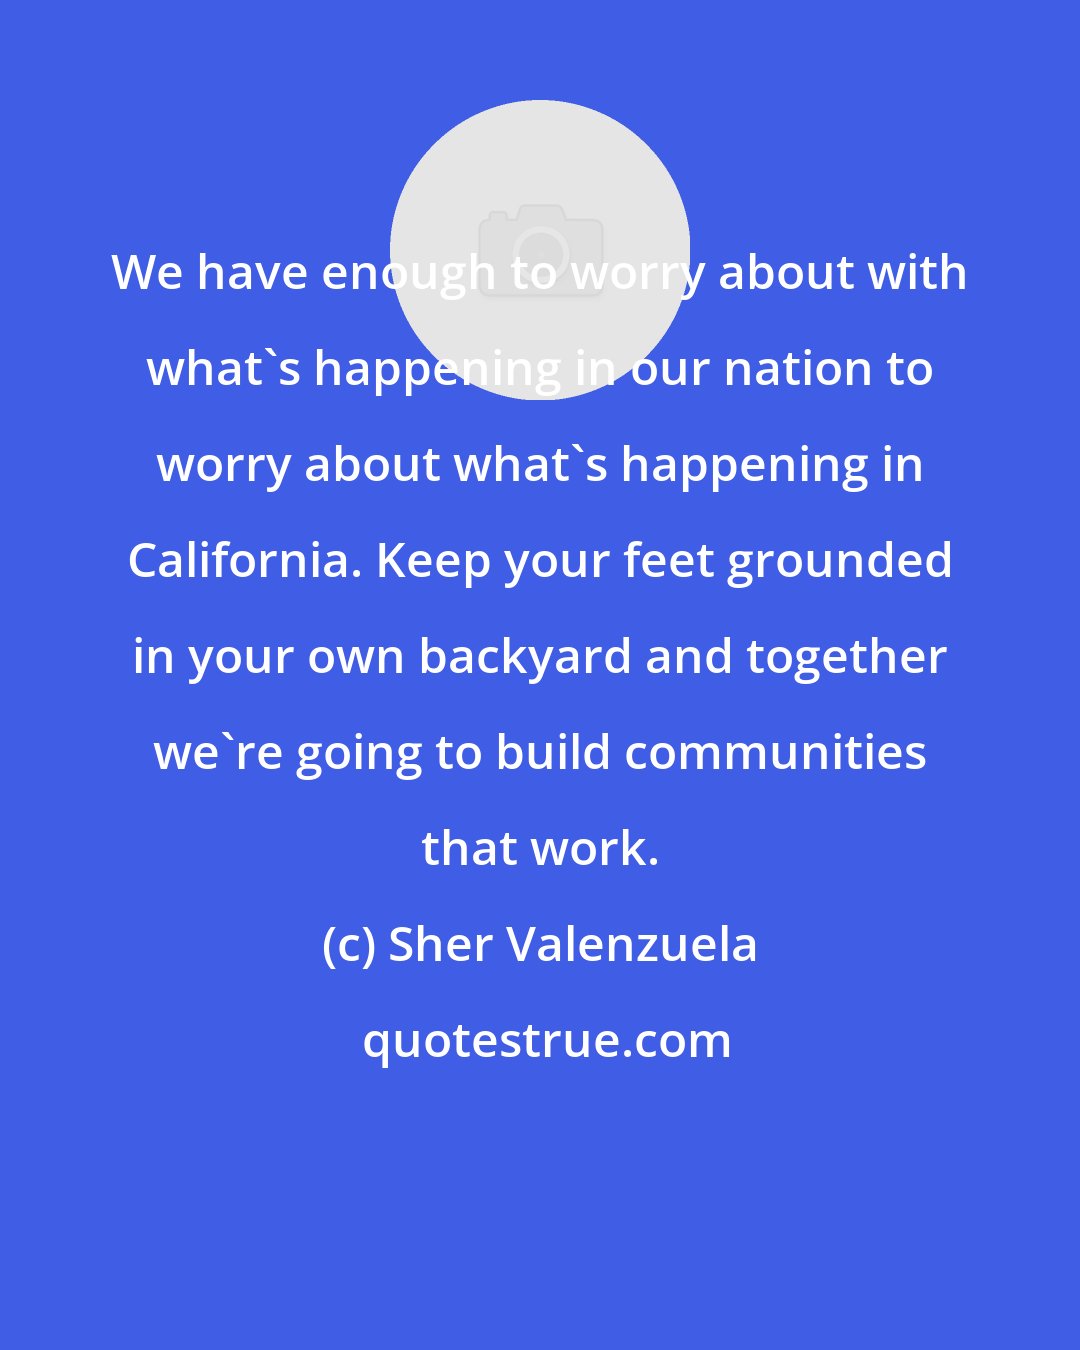 Sher Valenzuela: We have enough to worry about with what's happening in our nation to worry about what's happening in California. Keep your feet grounded in your own backyard and together we're going to build communities that work.